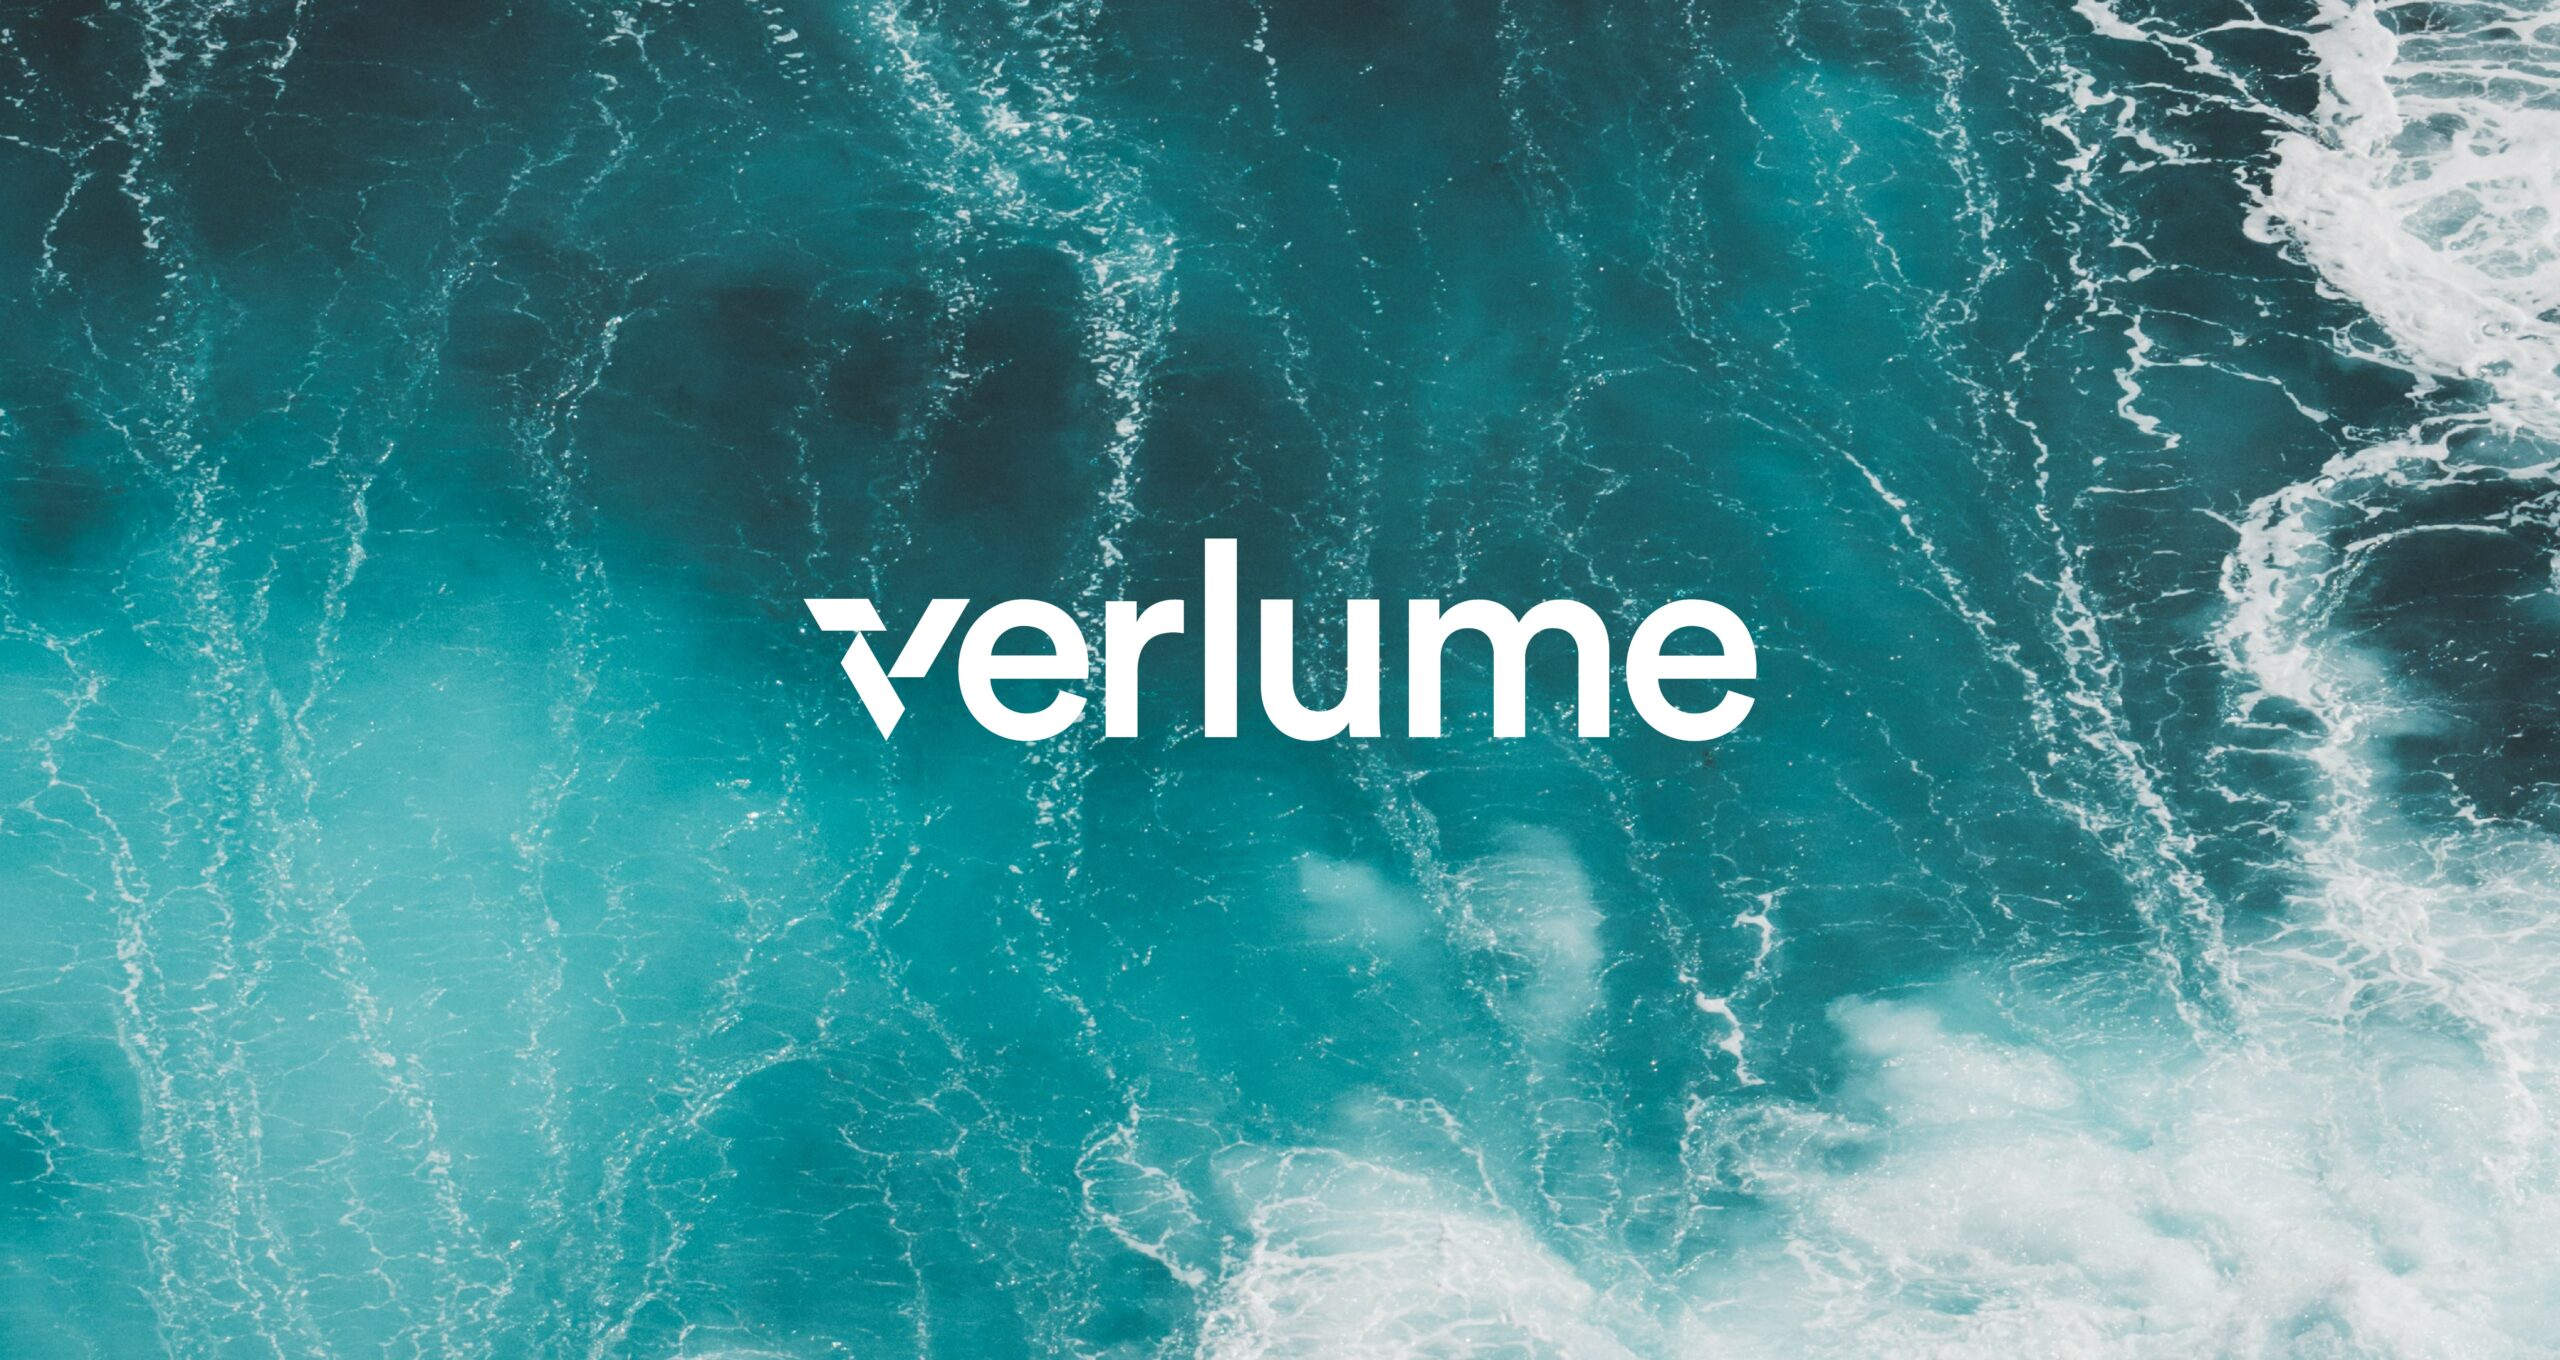 MEMBER NEWS: EC-OG reinforces leading position in energy transition with name change to Verlume